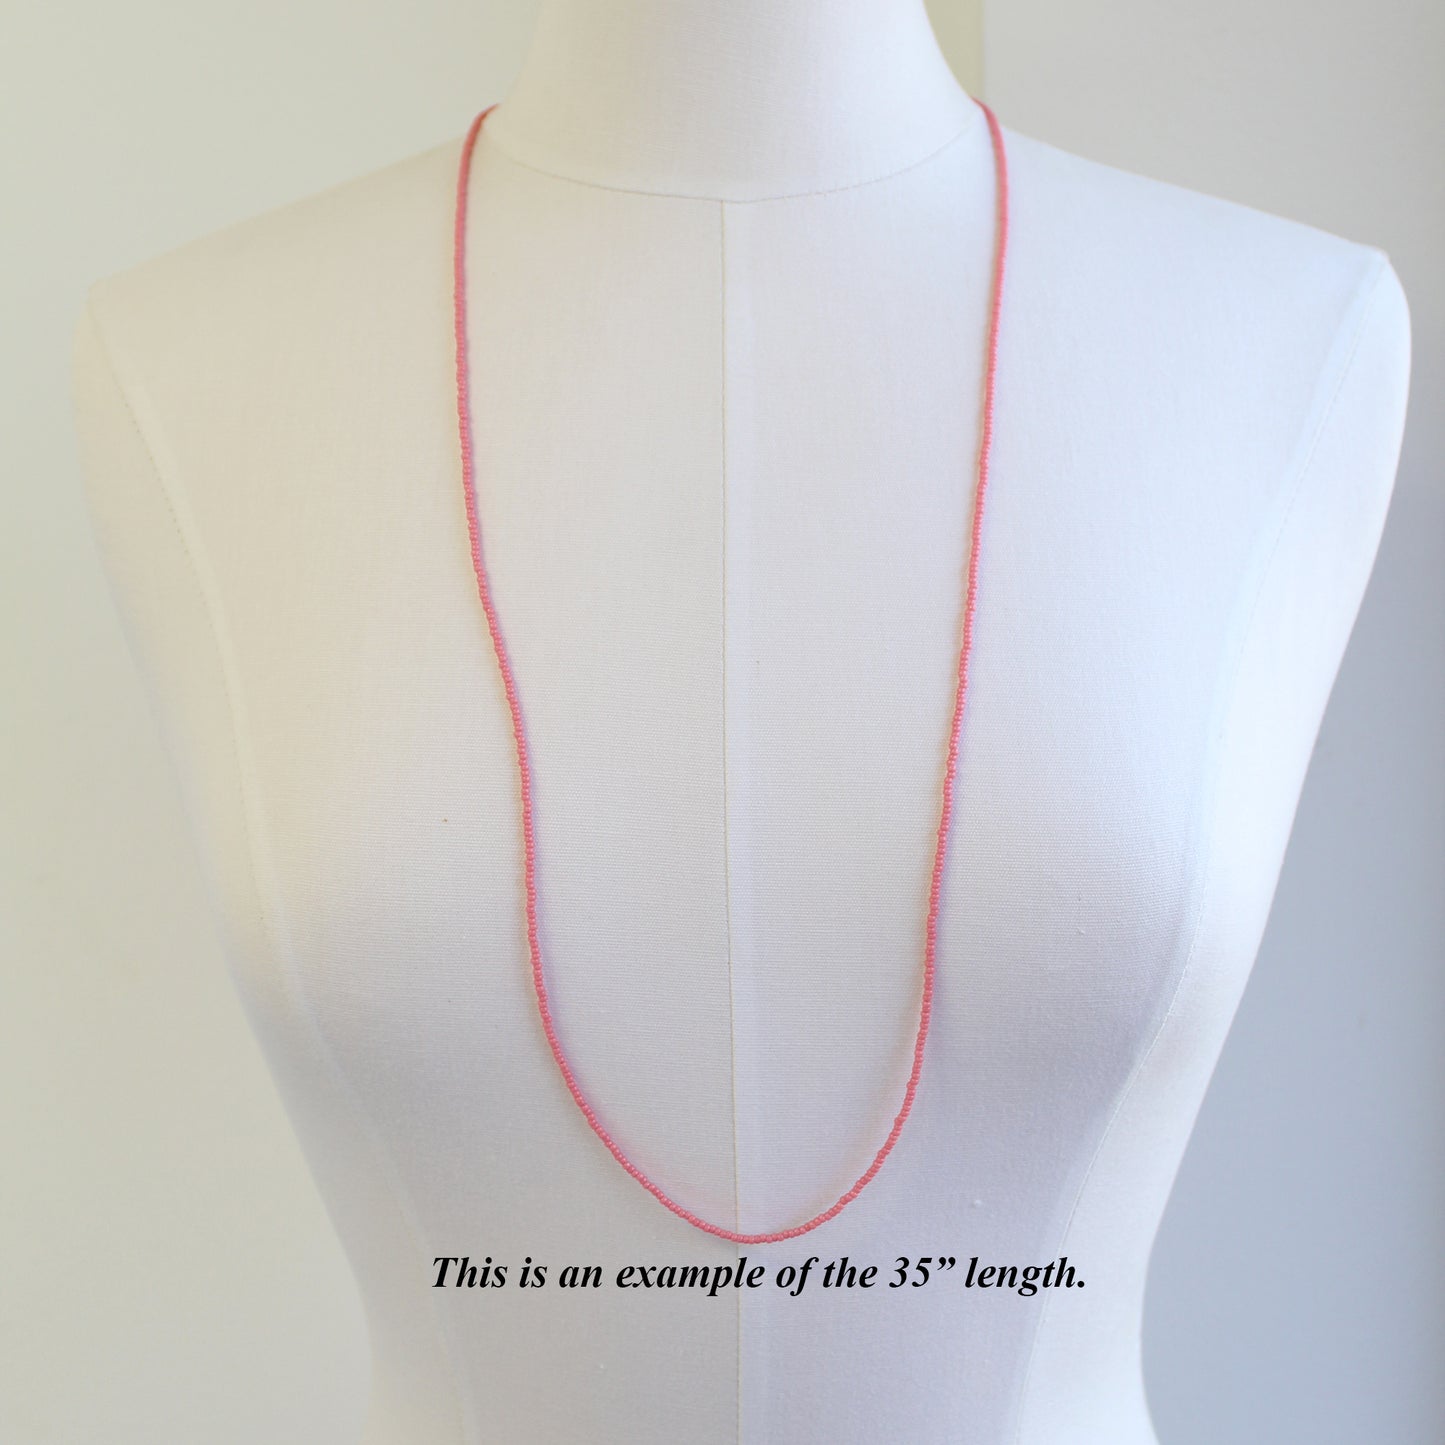 Load image into Gallery viewer, Long Guava Pink Seed Bead Necklace, Thin 1.5mm Single Strand Necklace
